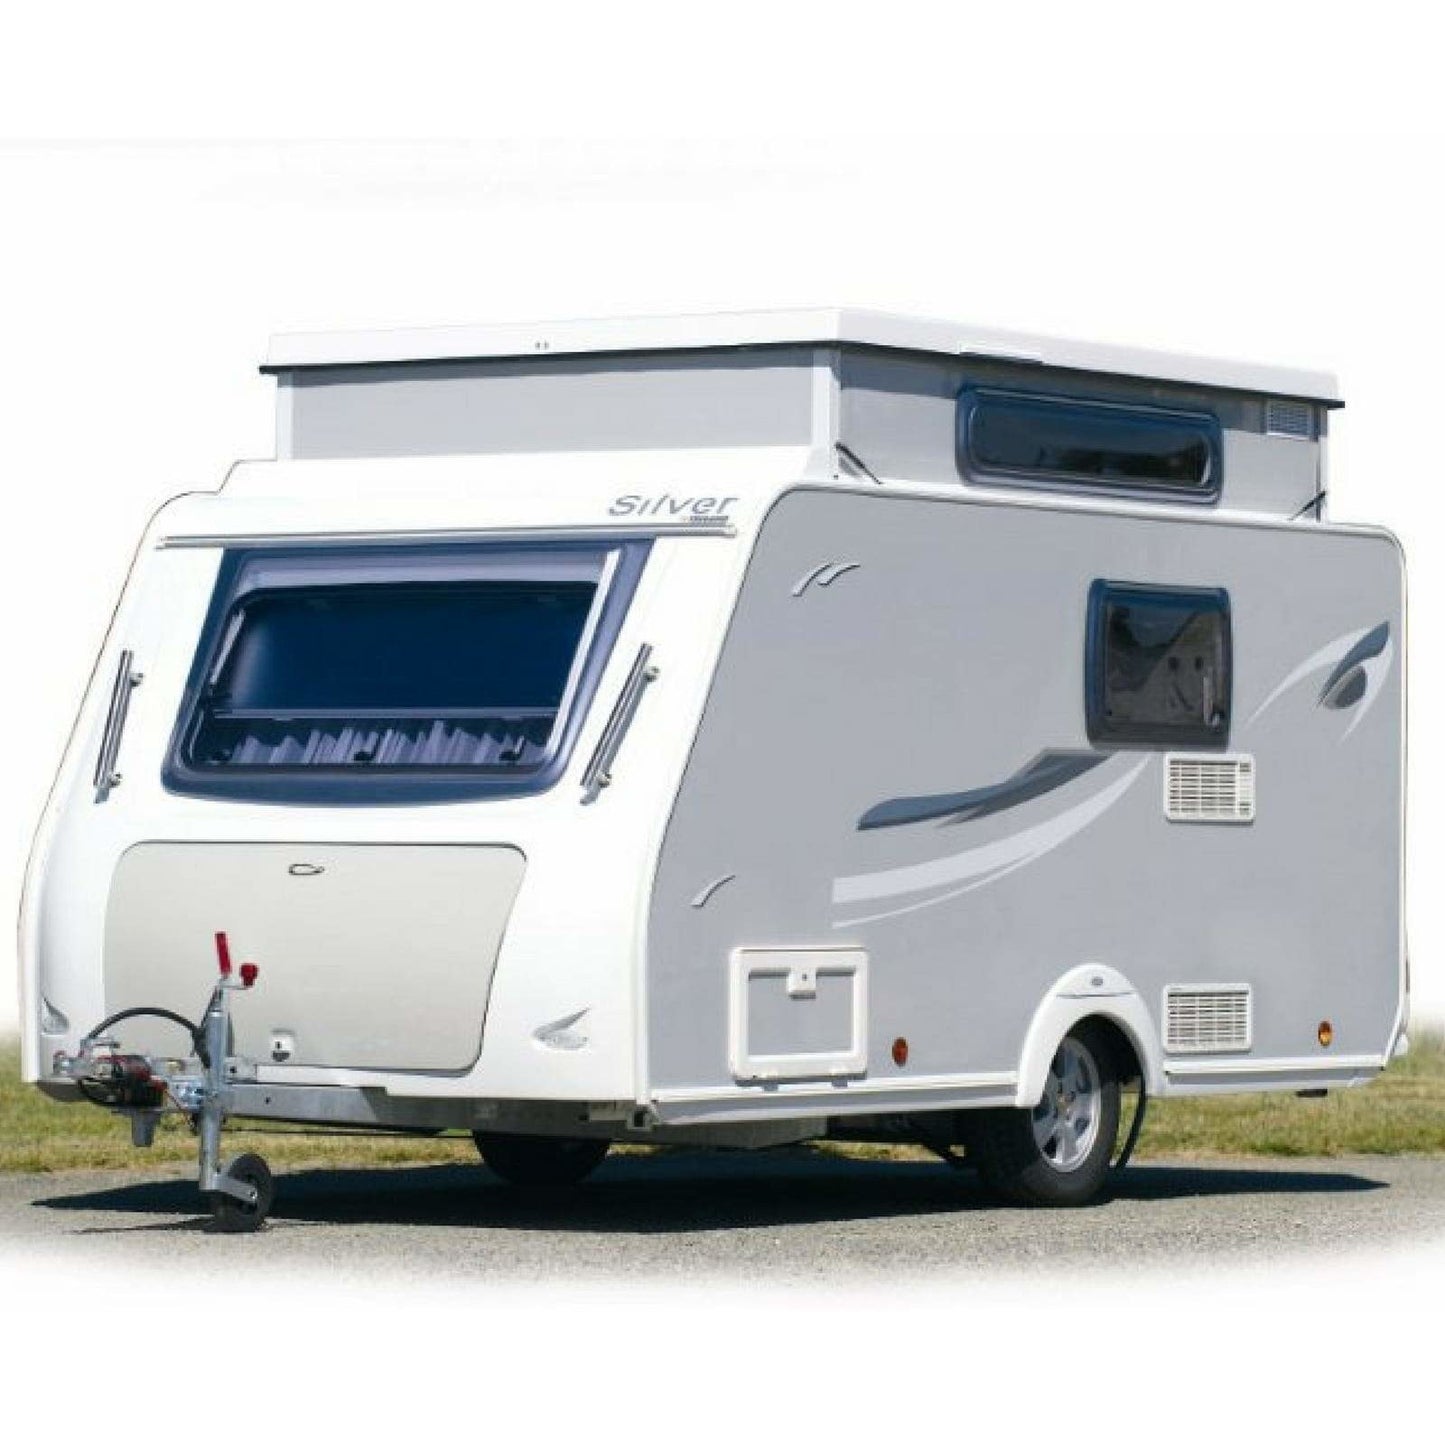 WALKER Pioneer 240 All Season for Trigano Silver (2018) + FREE Storm Straps - Quality Caravan Awnings